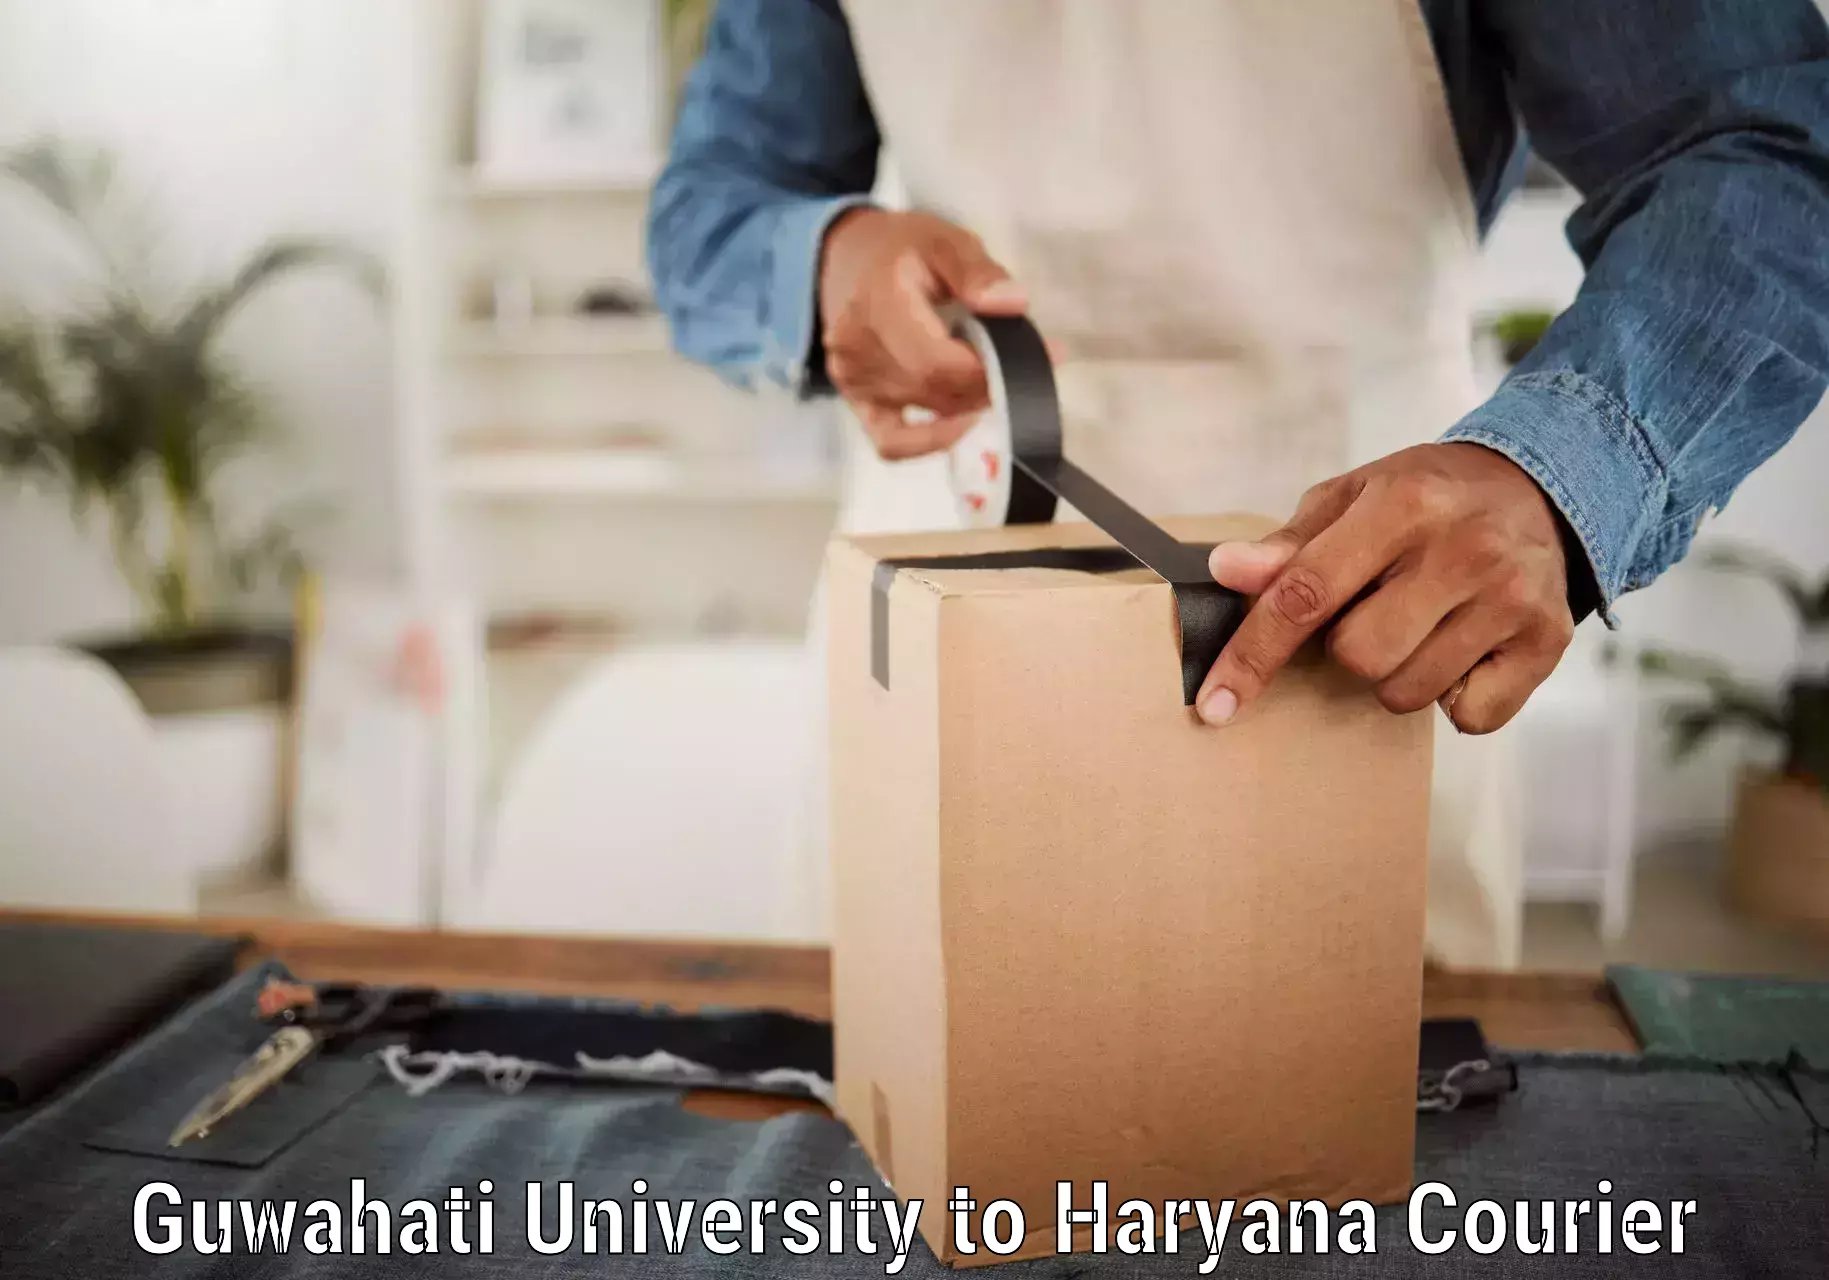 Expedited parcel delivery Guwahati University to Gurgaon